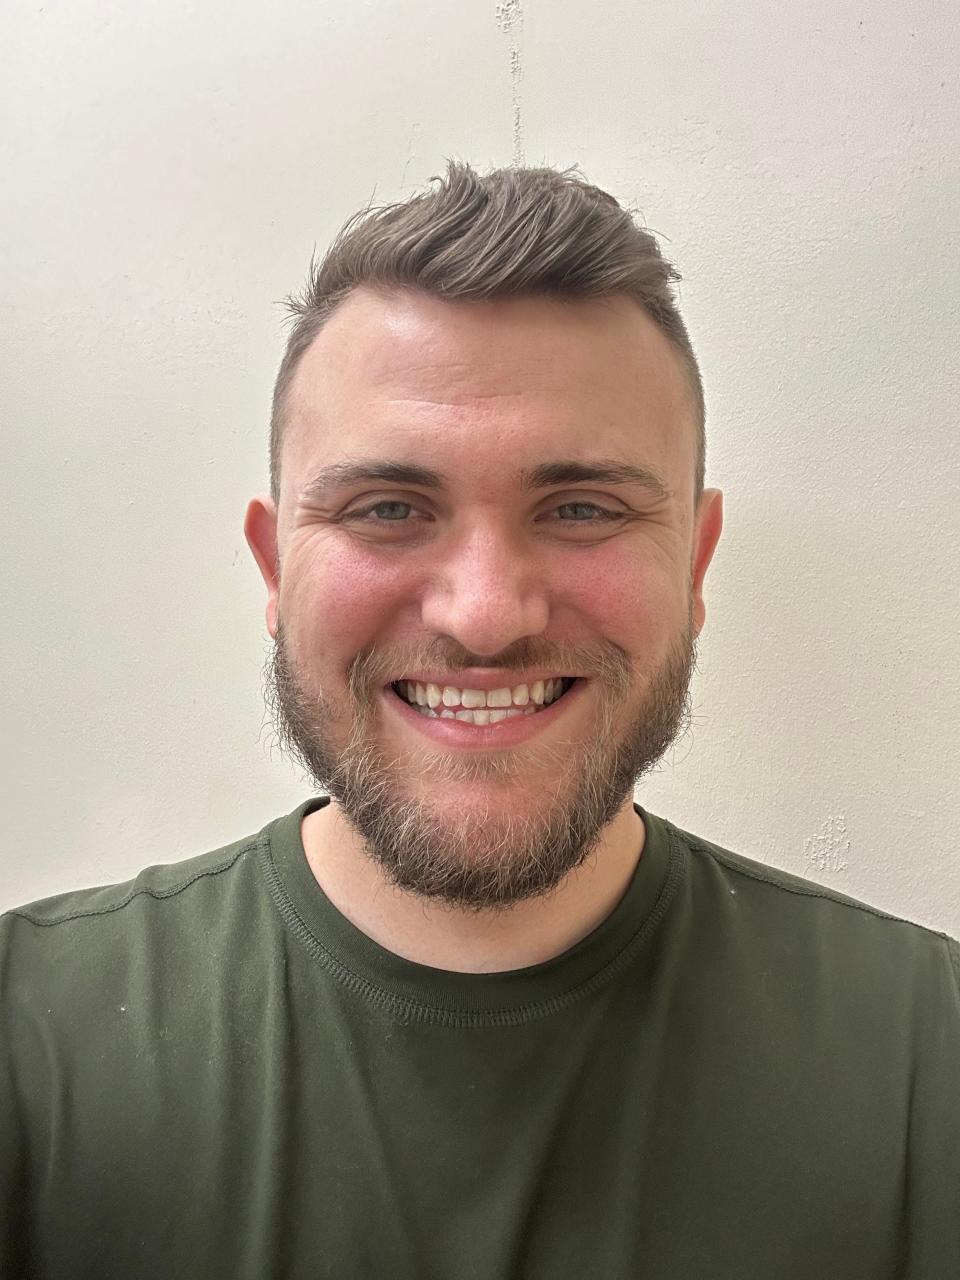 Ryan Rutkowski, a licensed clinical social worker, is a school-based/outpatient mental health therapist at the Cocoa-based Lifetime Counseling Center.